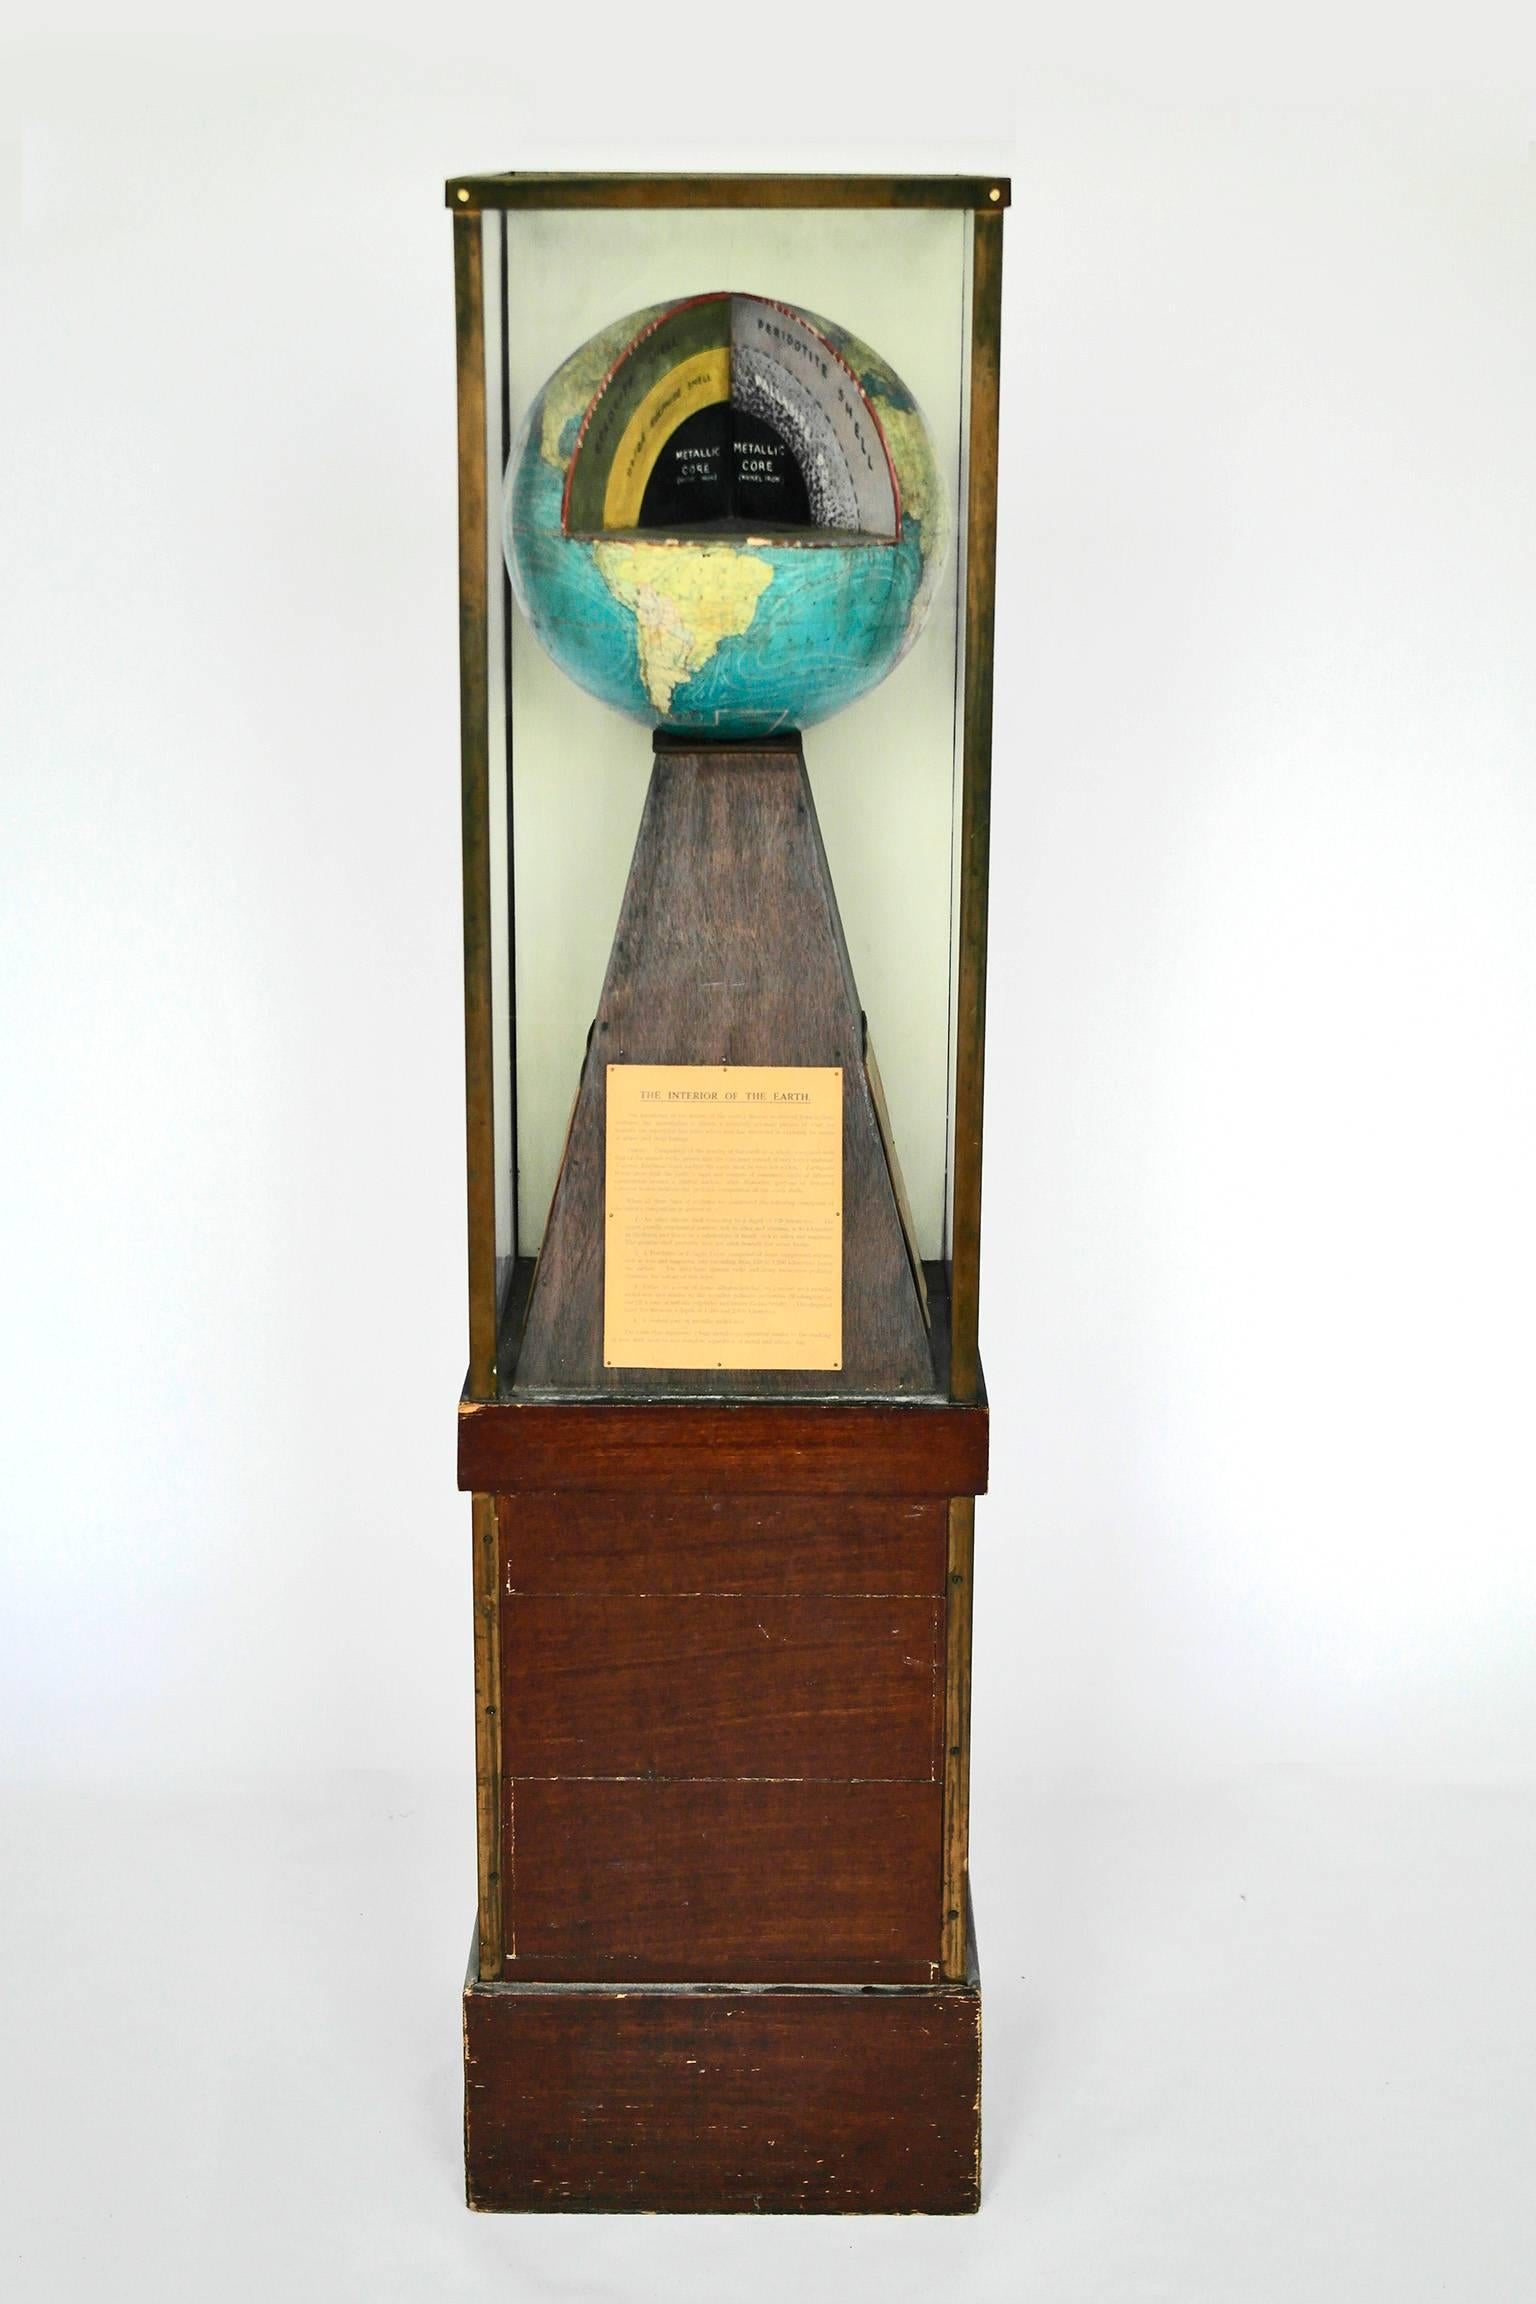 A interesting educational model of the structure of the earth encased in a mahogany and glass cabinet.